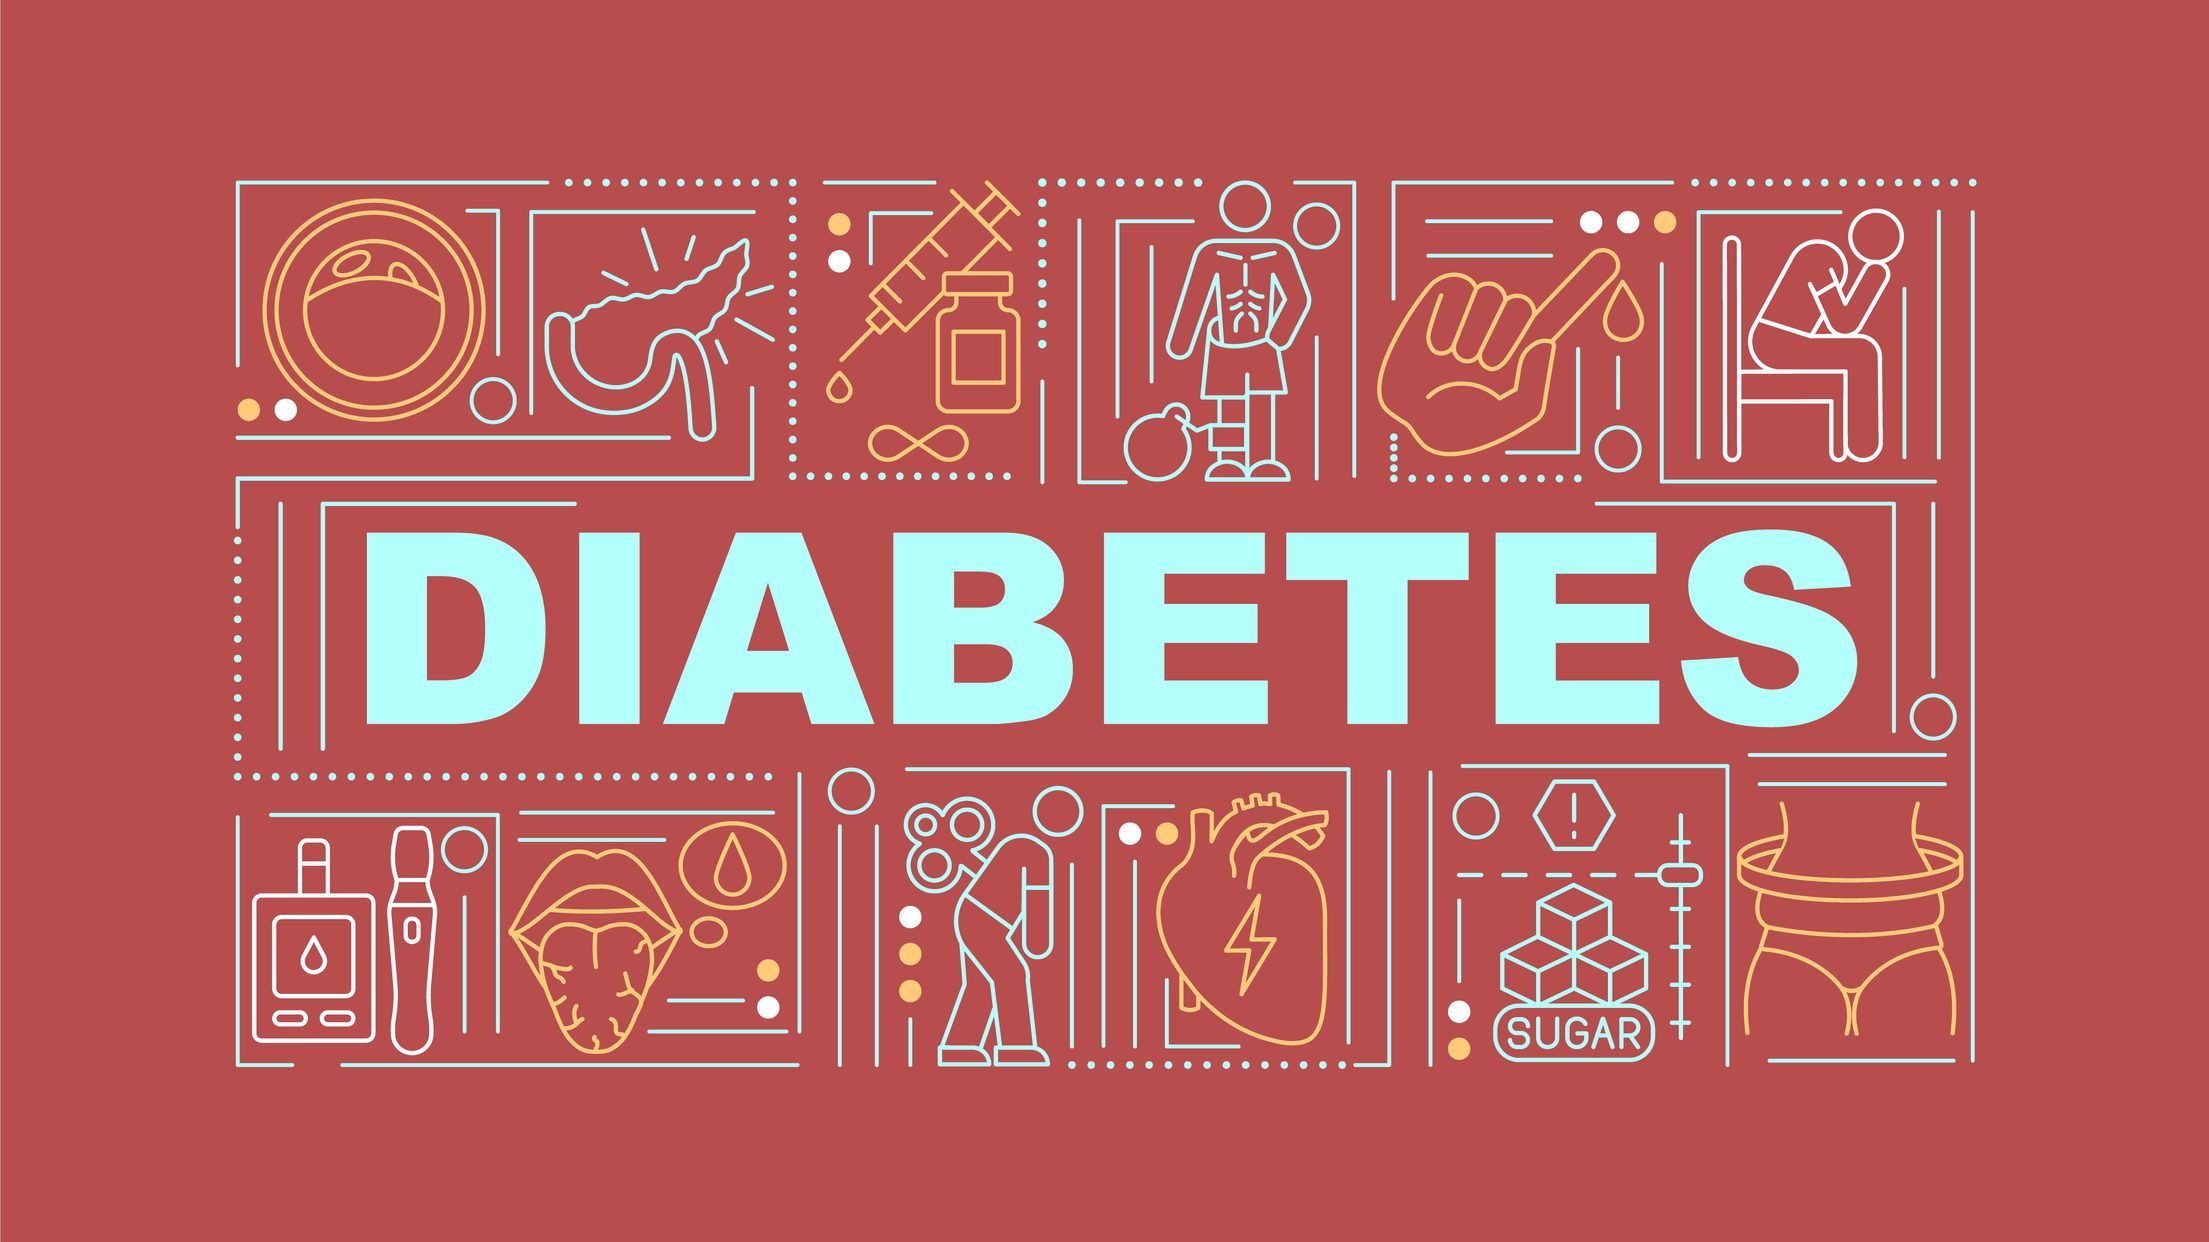 In simple terms, diabetes happens when your pancreas doesn’t produce insulin or your body is resistant to insulin and can’t use it properly. (GETTY)